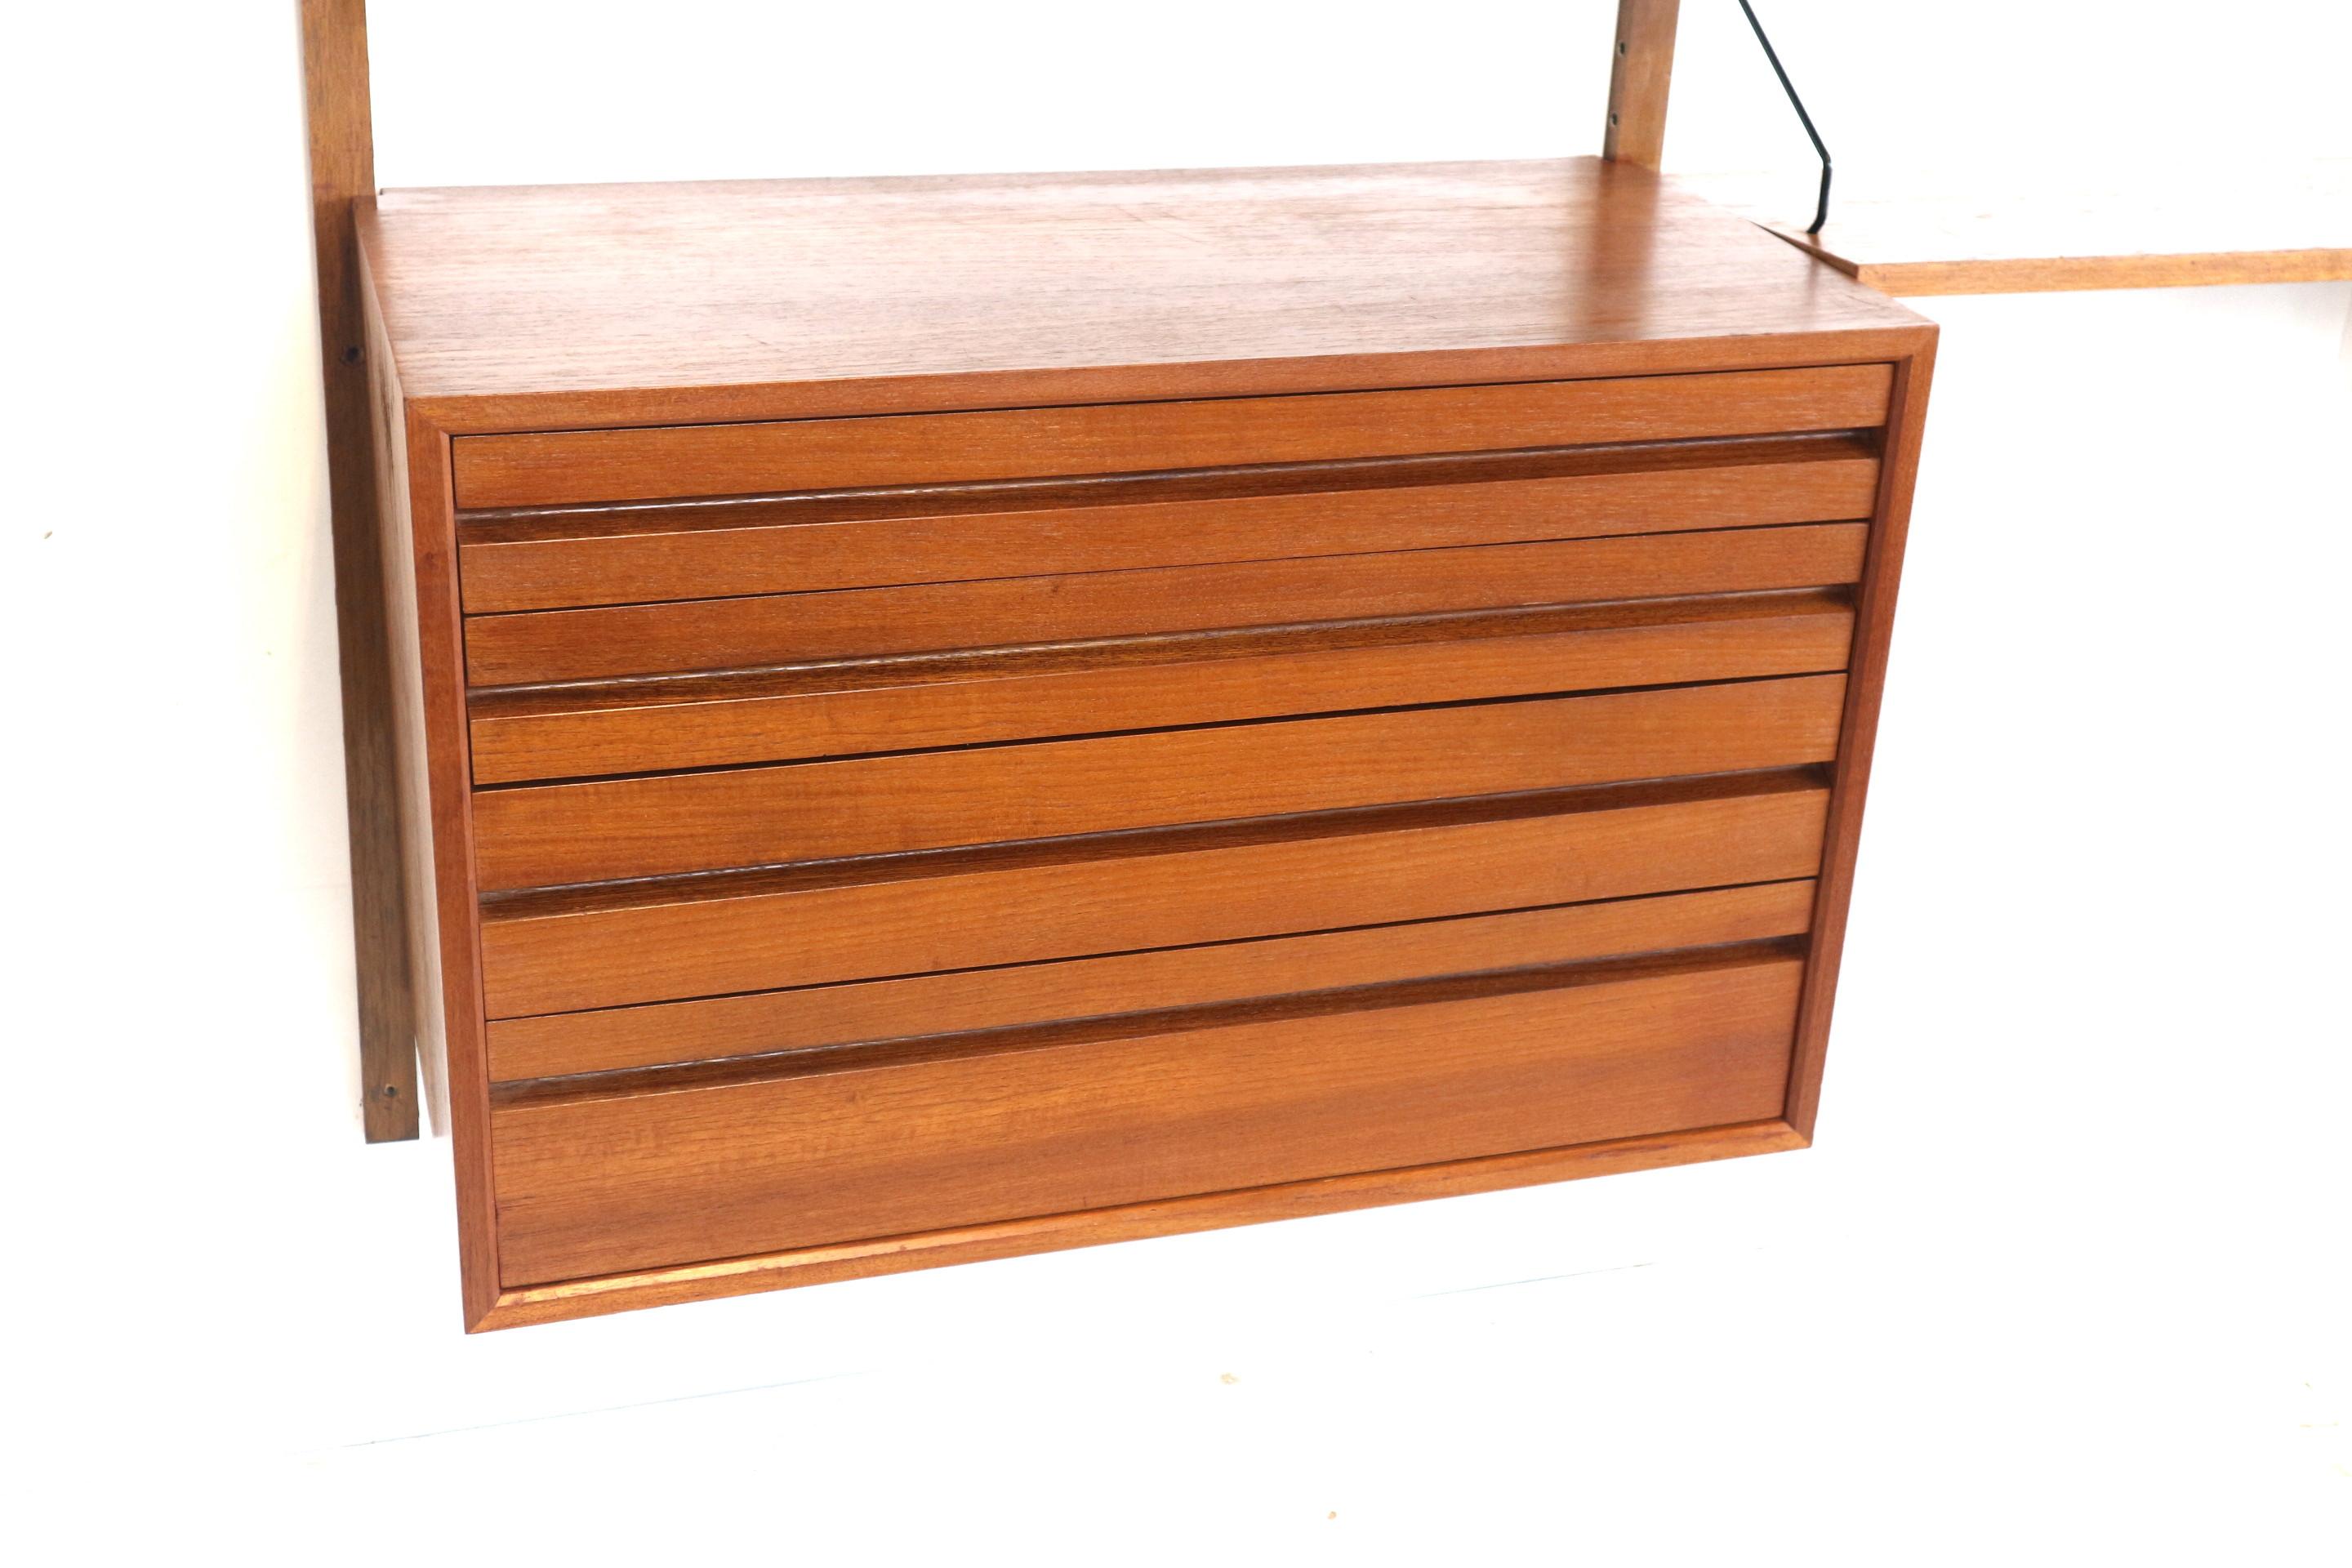 Large vintage wall system by Poul Cadovius made in the 1960s.

Dimensions:
Width: 243 cm
Height: 202 cm
Depth: 40 cm

Valve box:
Width: 80 cm
Depth: 37.5 cm
Height: 42.5 cm

Chest of drawers:
Width: 80 cm
Depth: 40 cm
Height: 52 cm

Depth shelves: